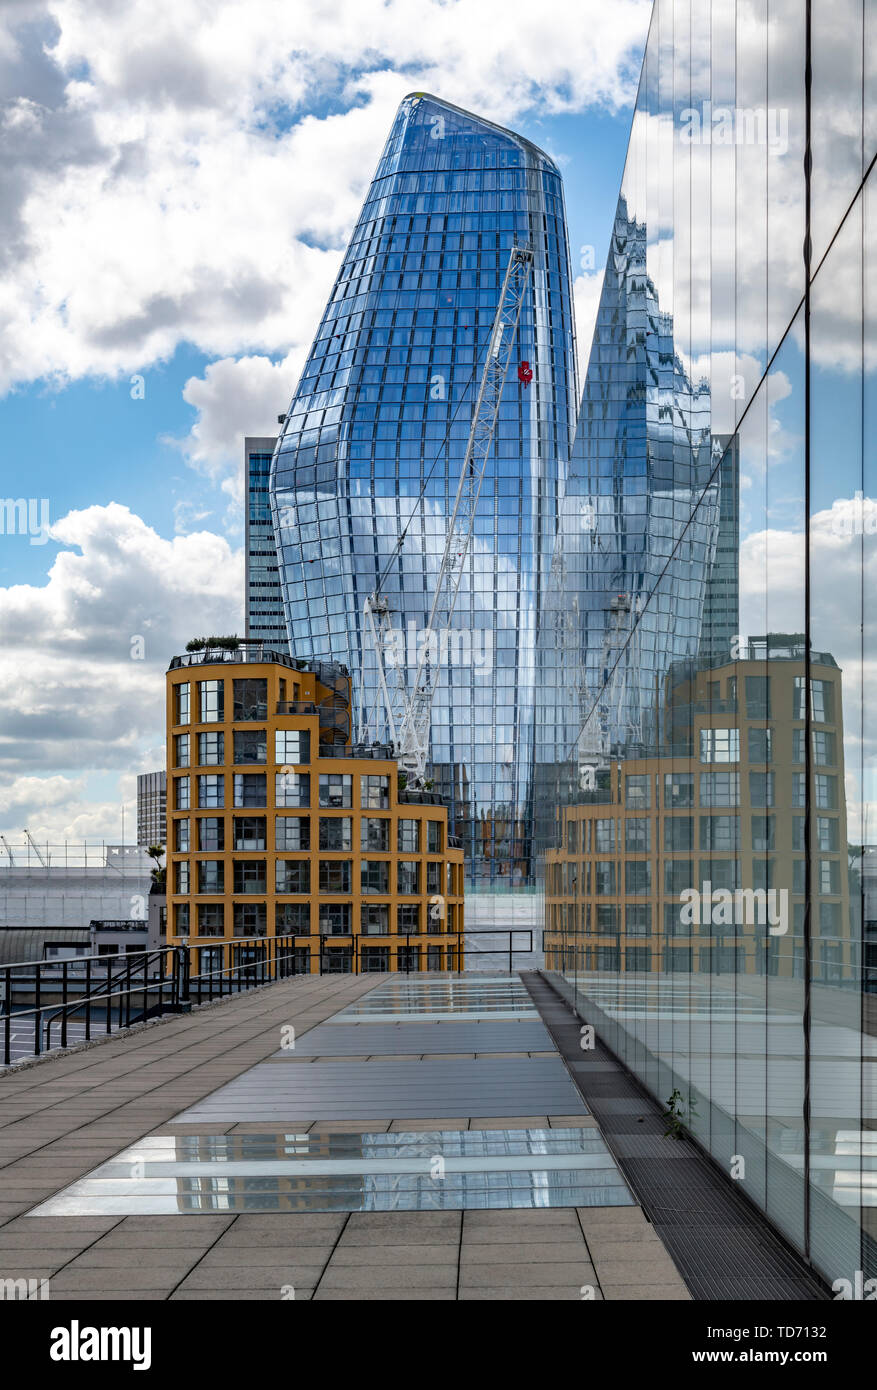 New skyscraper in London officially called One Blackfriars. Also known as The Vase or The Boomerang. The reflective building, right is Tate Modern. Stock Photo